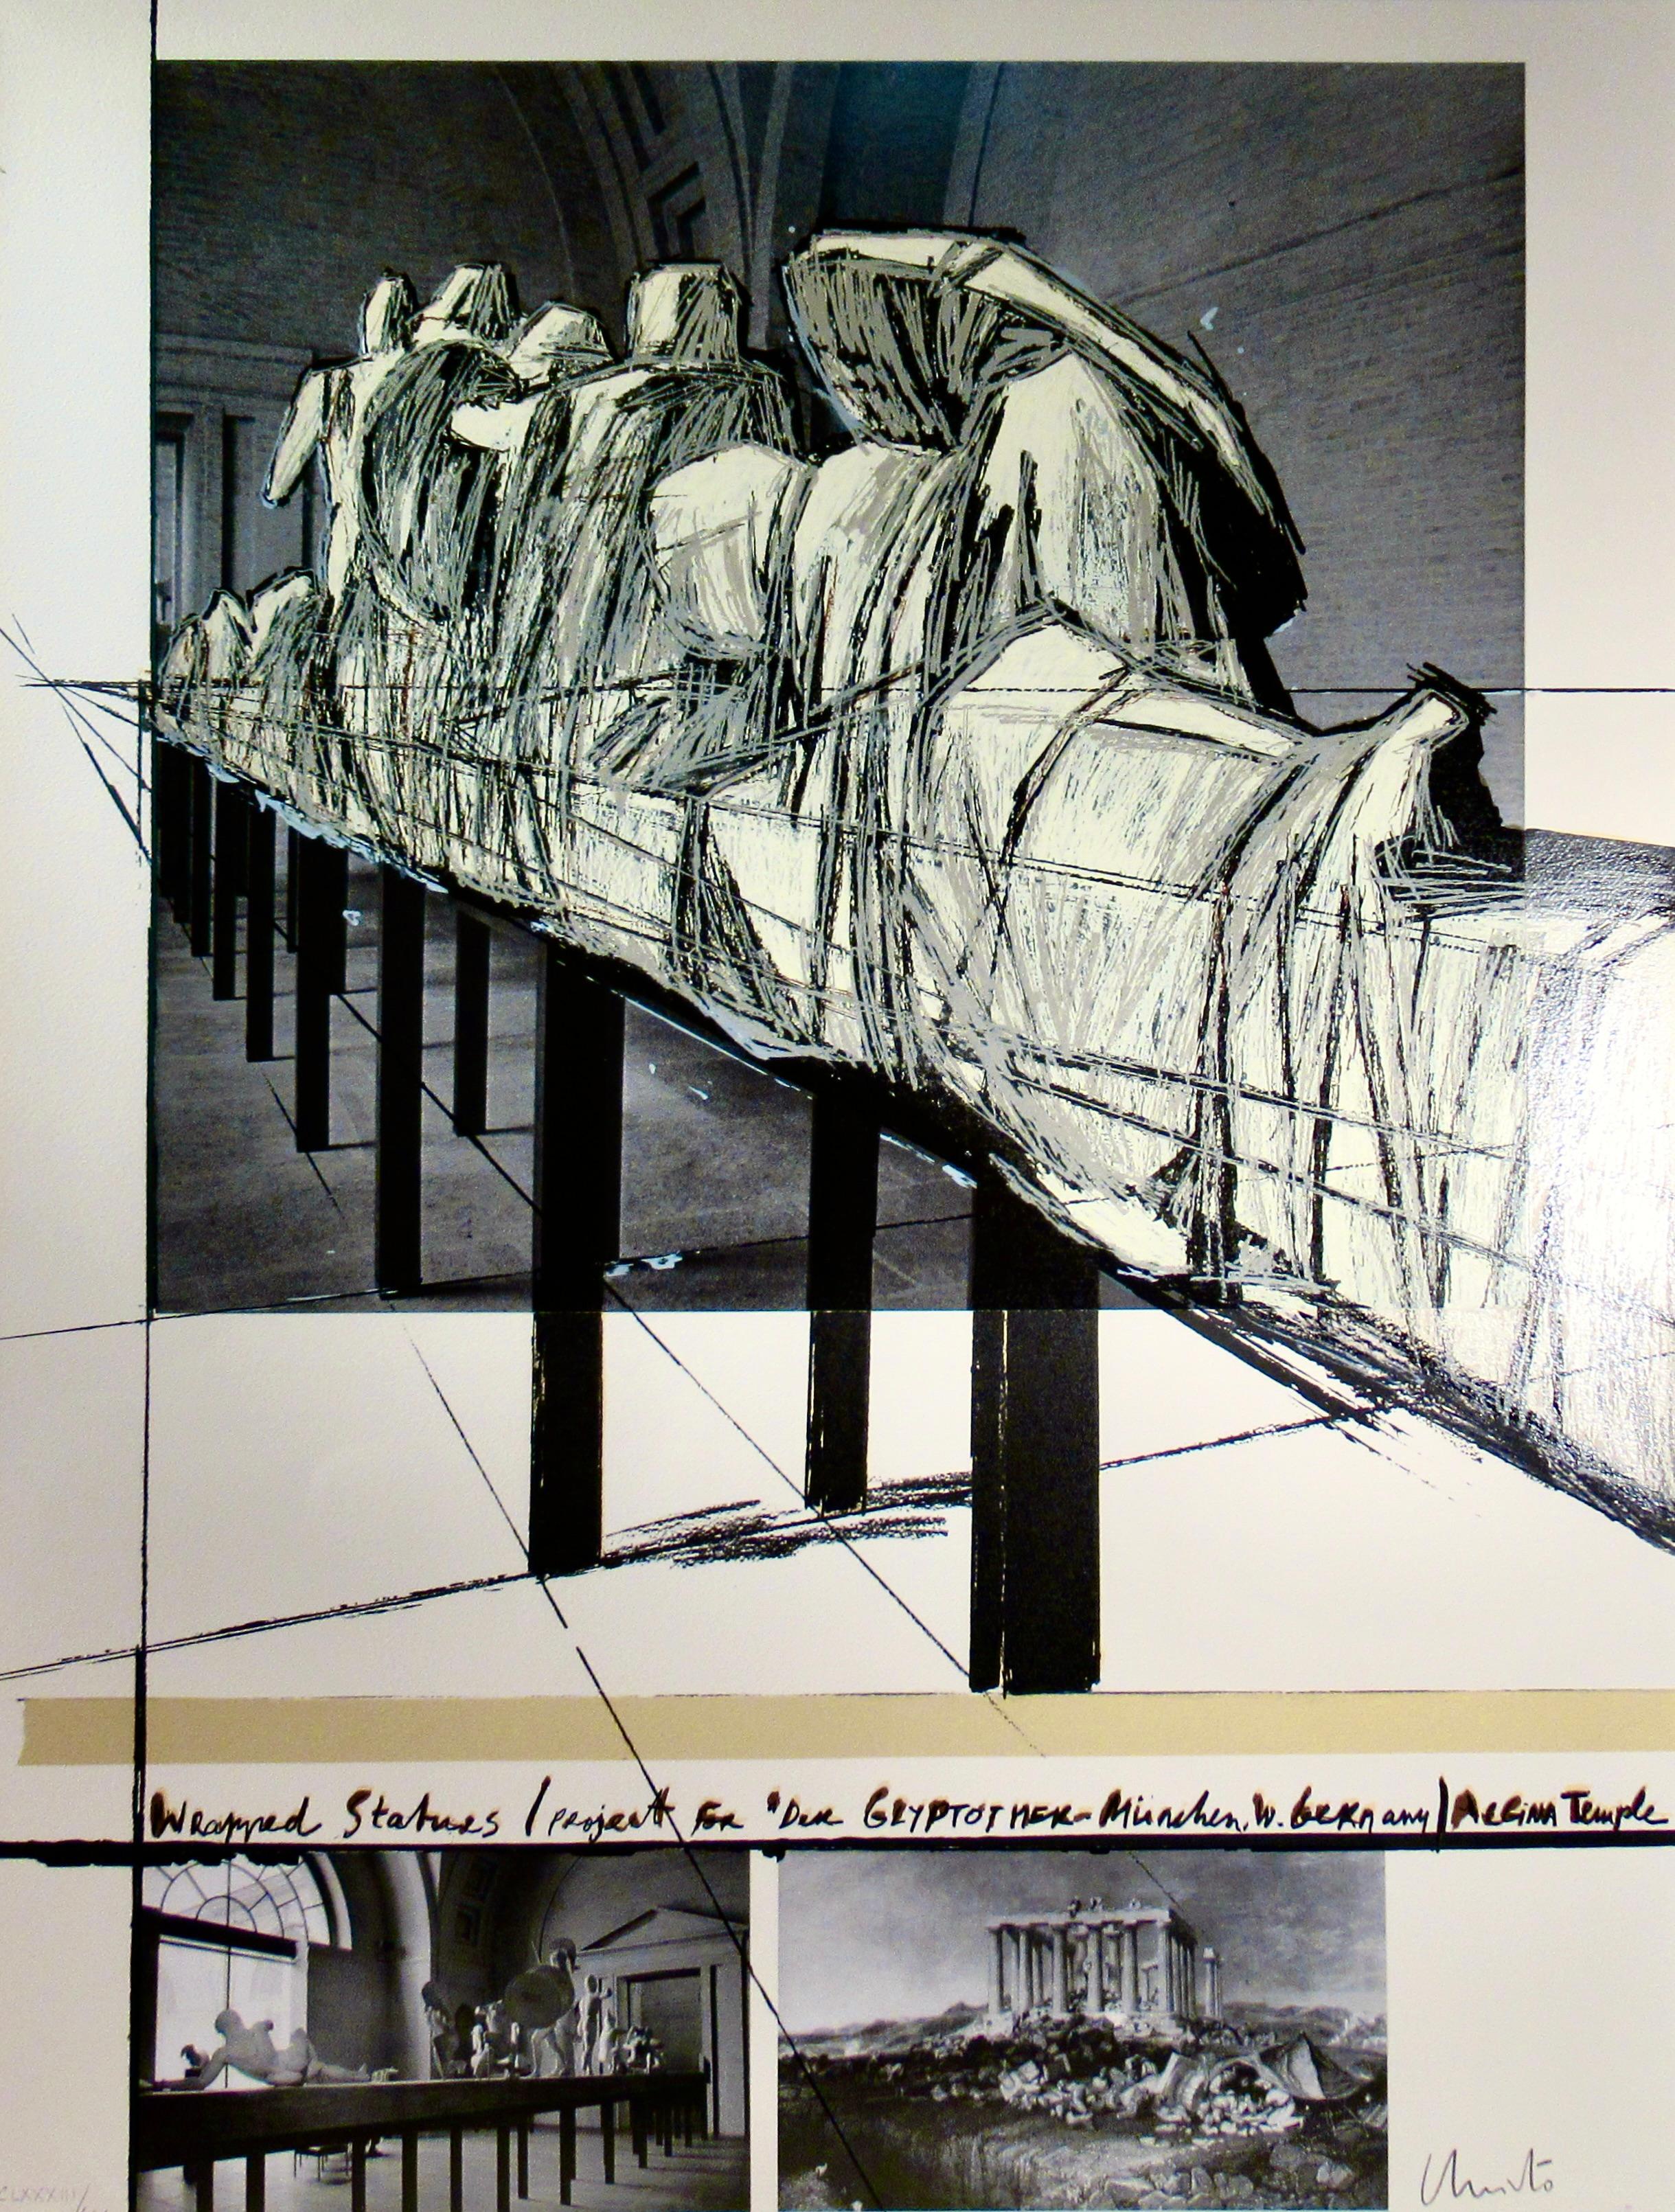  "Wrapped Statues, Aegina Temple" Large screen print with collage.